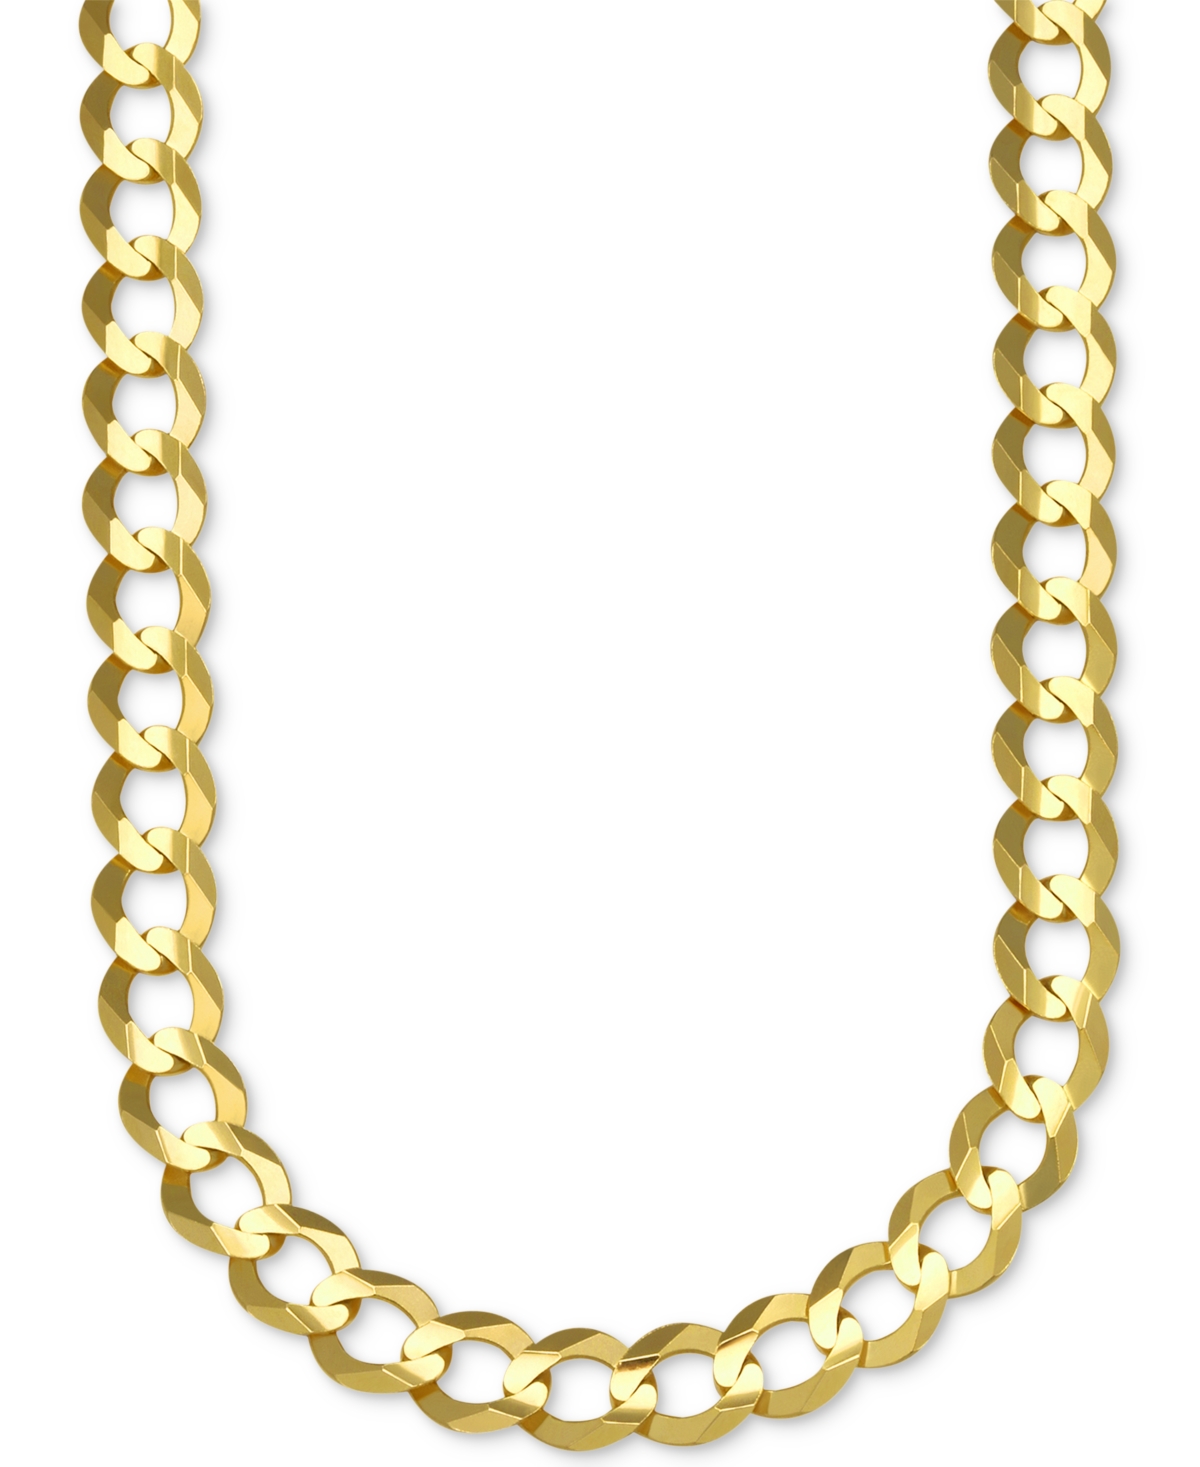 26" Open Curb Link Chain Necklace in Solid 10k Gold - Gold